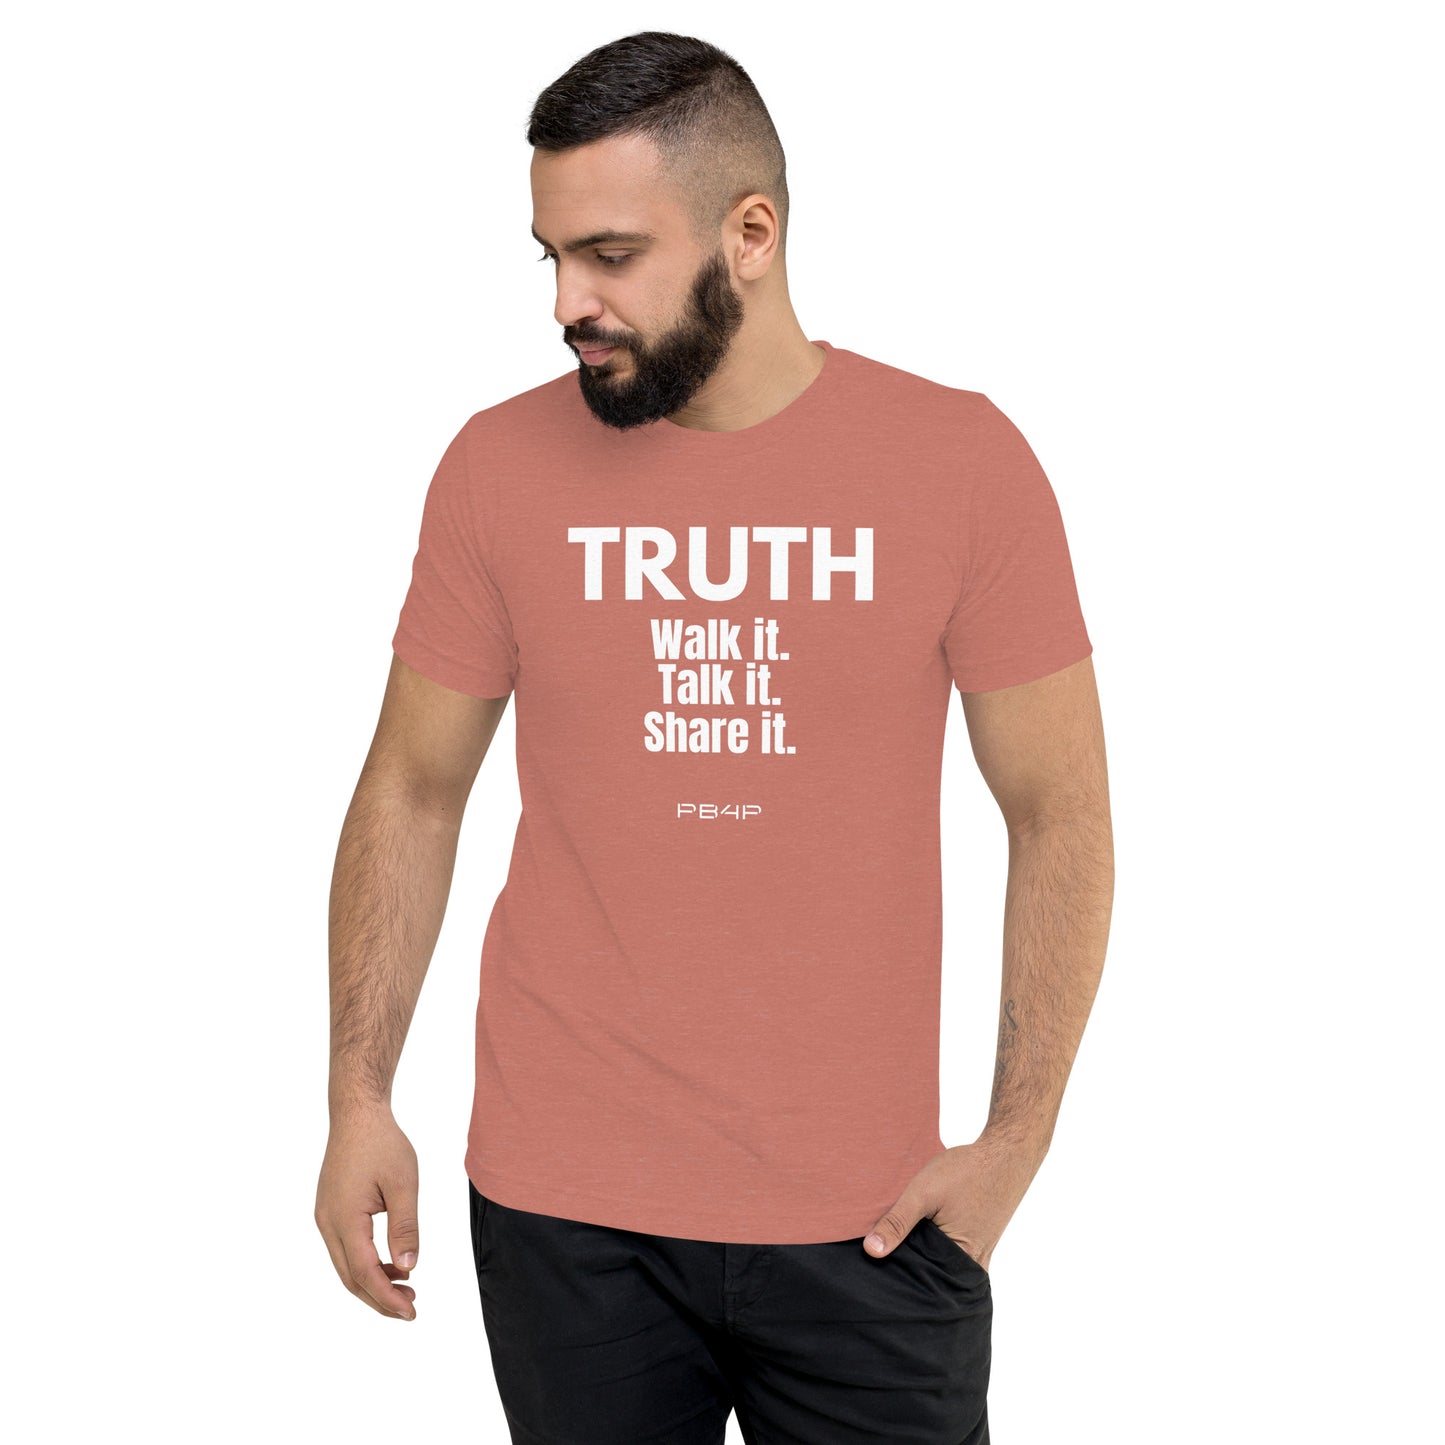 TRUTH Men's Tri-Blend Soft Style Tee